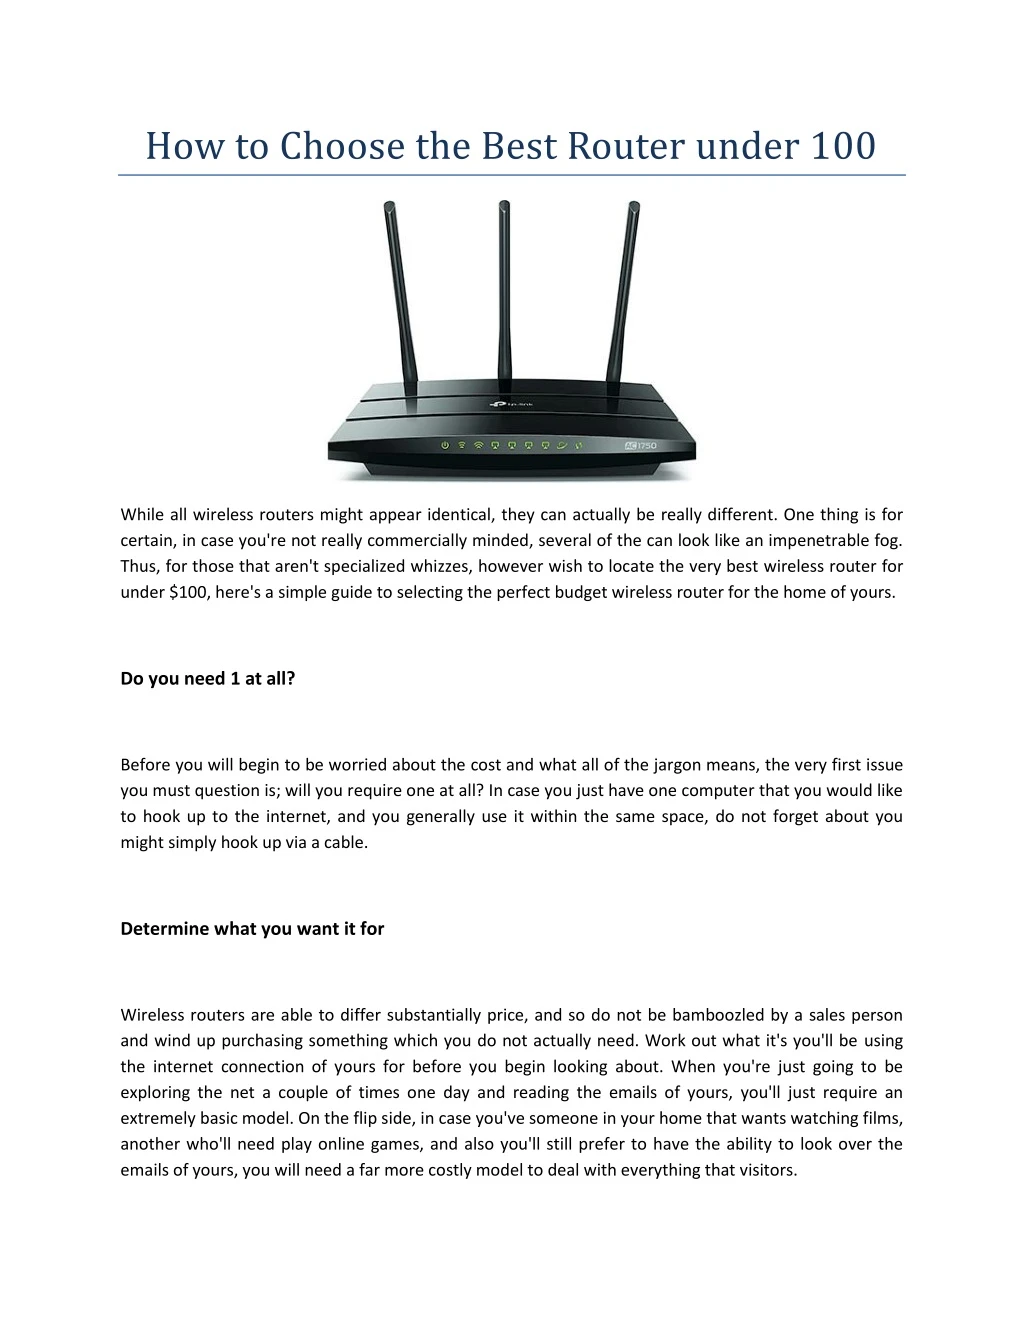 how to choose the best router under 100